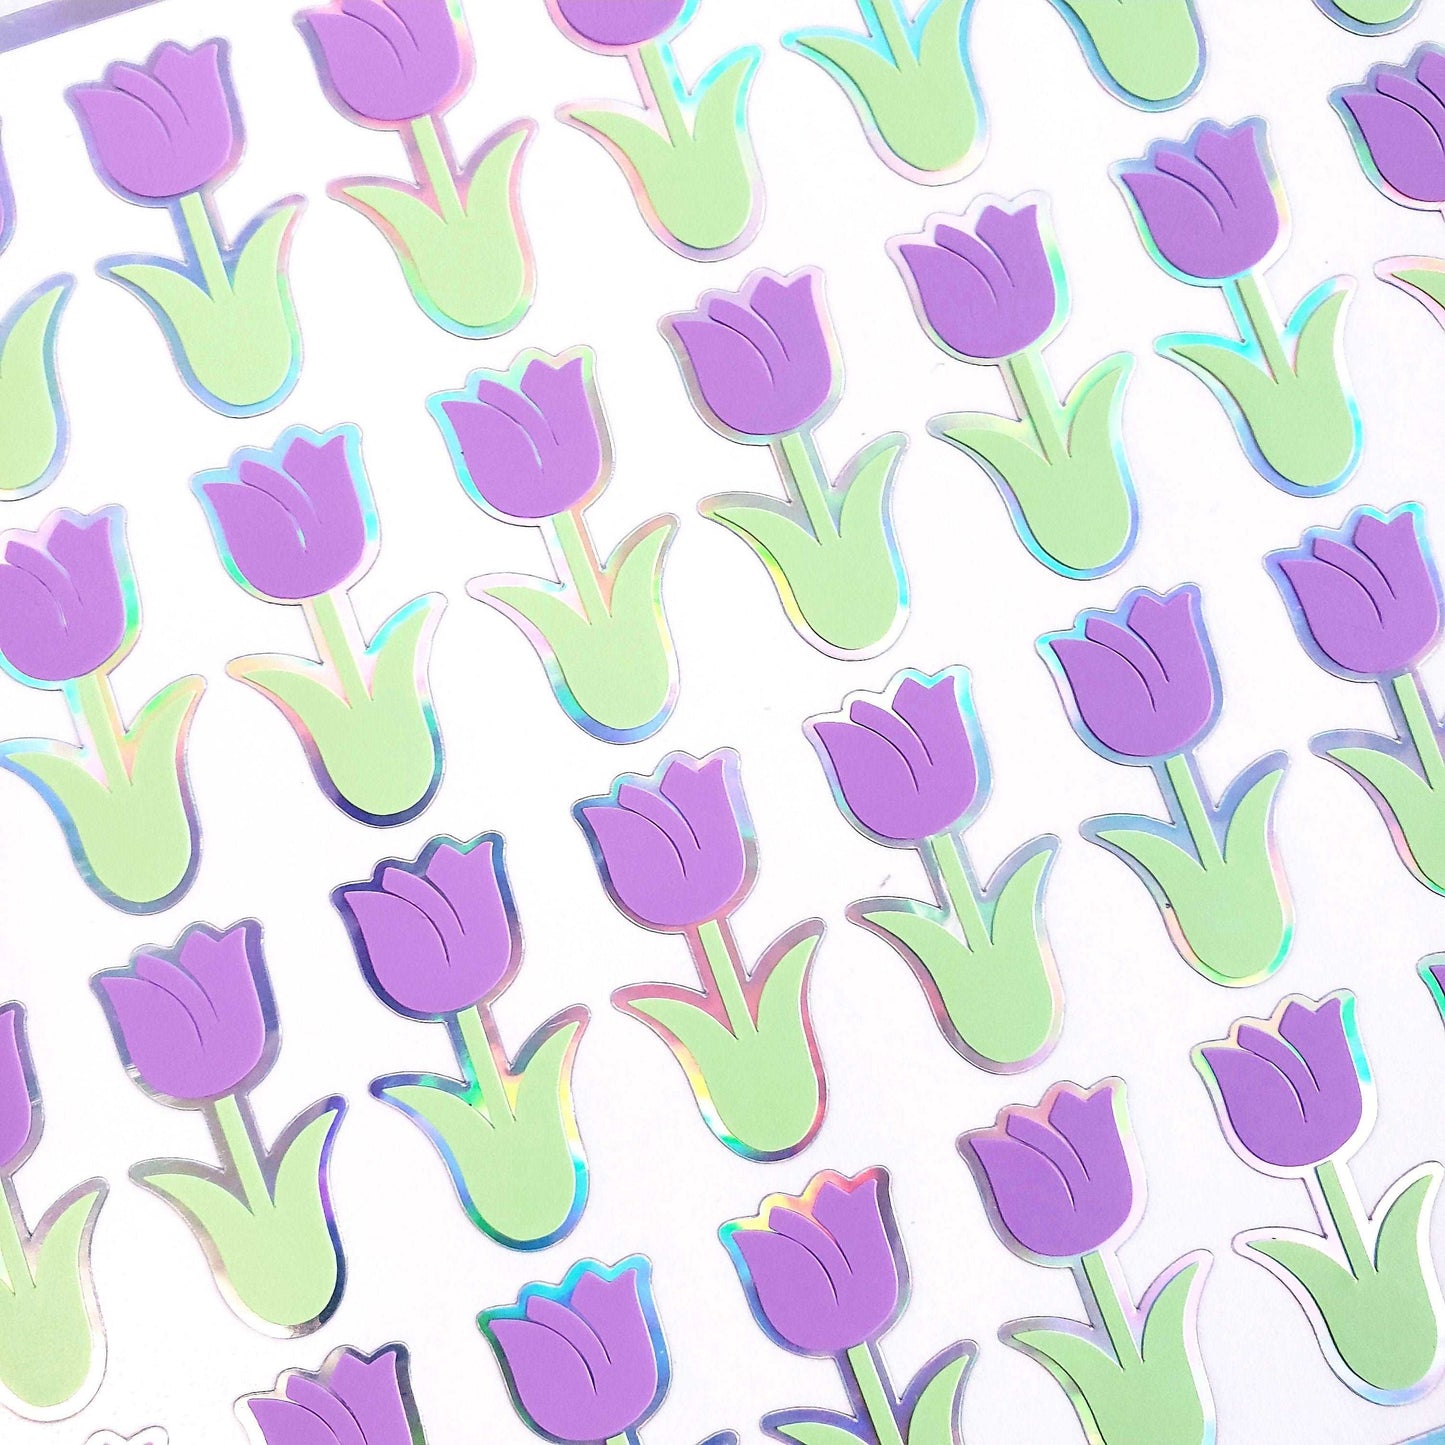 Lilac Tulip Stickers, set of 40 light purple flower decals for Easter, Mother's Day and spring weddings, lavender tulip stickers.